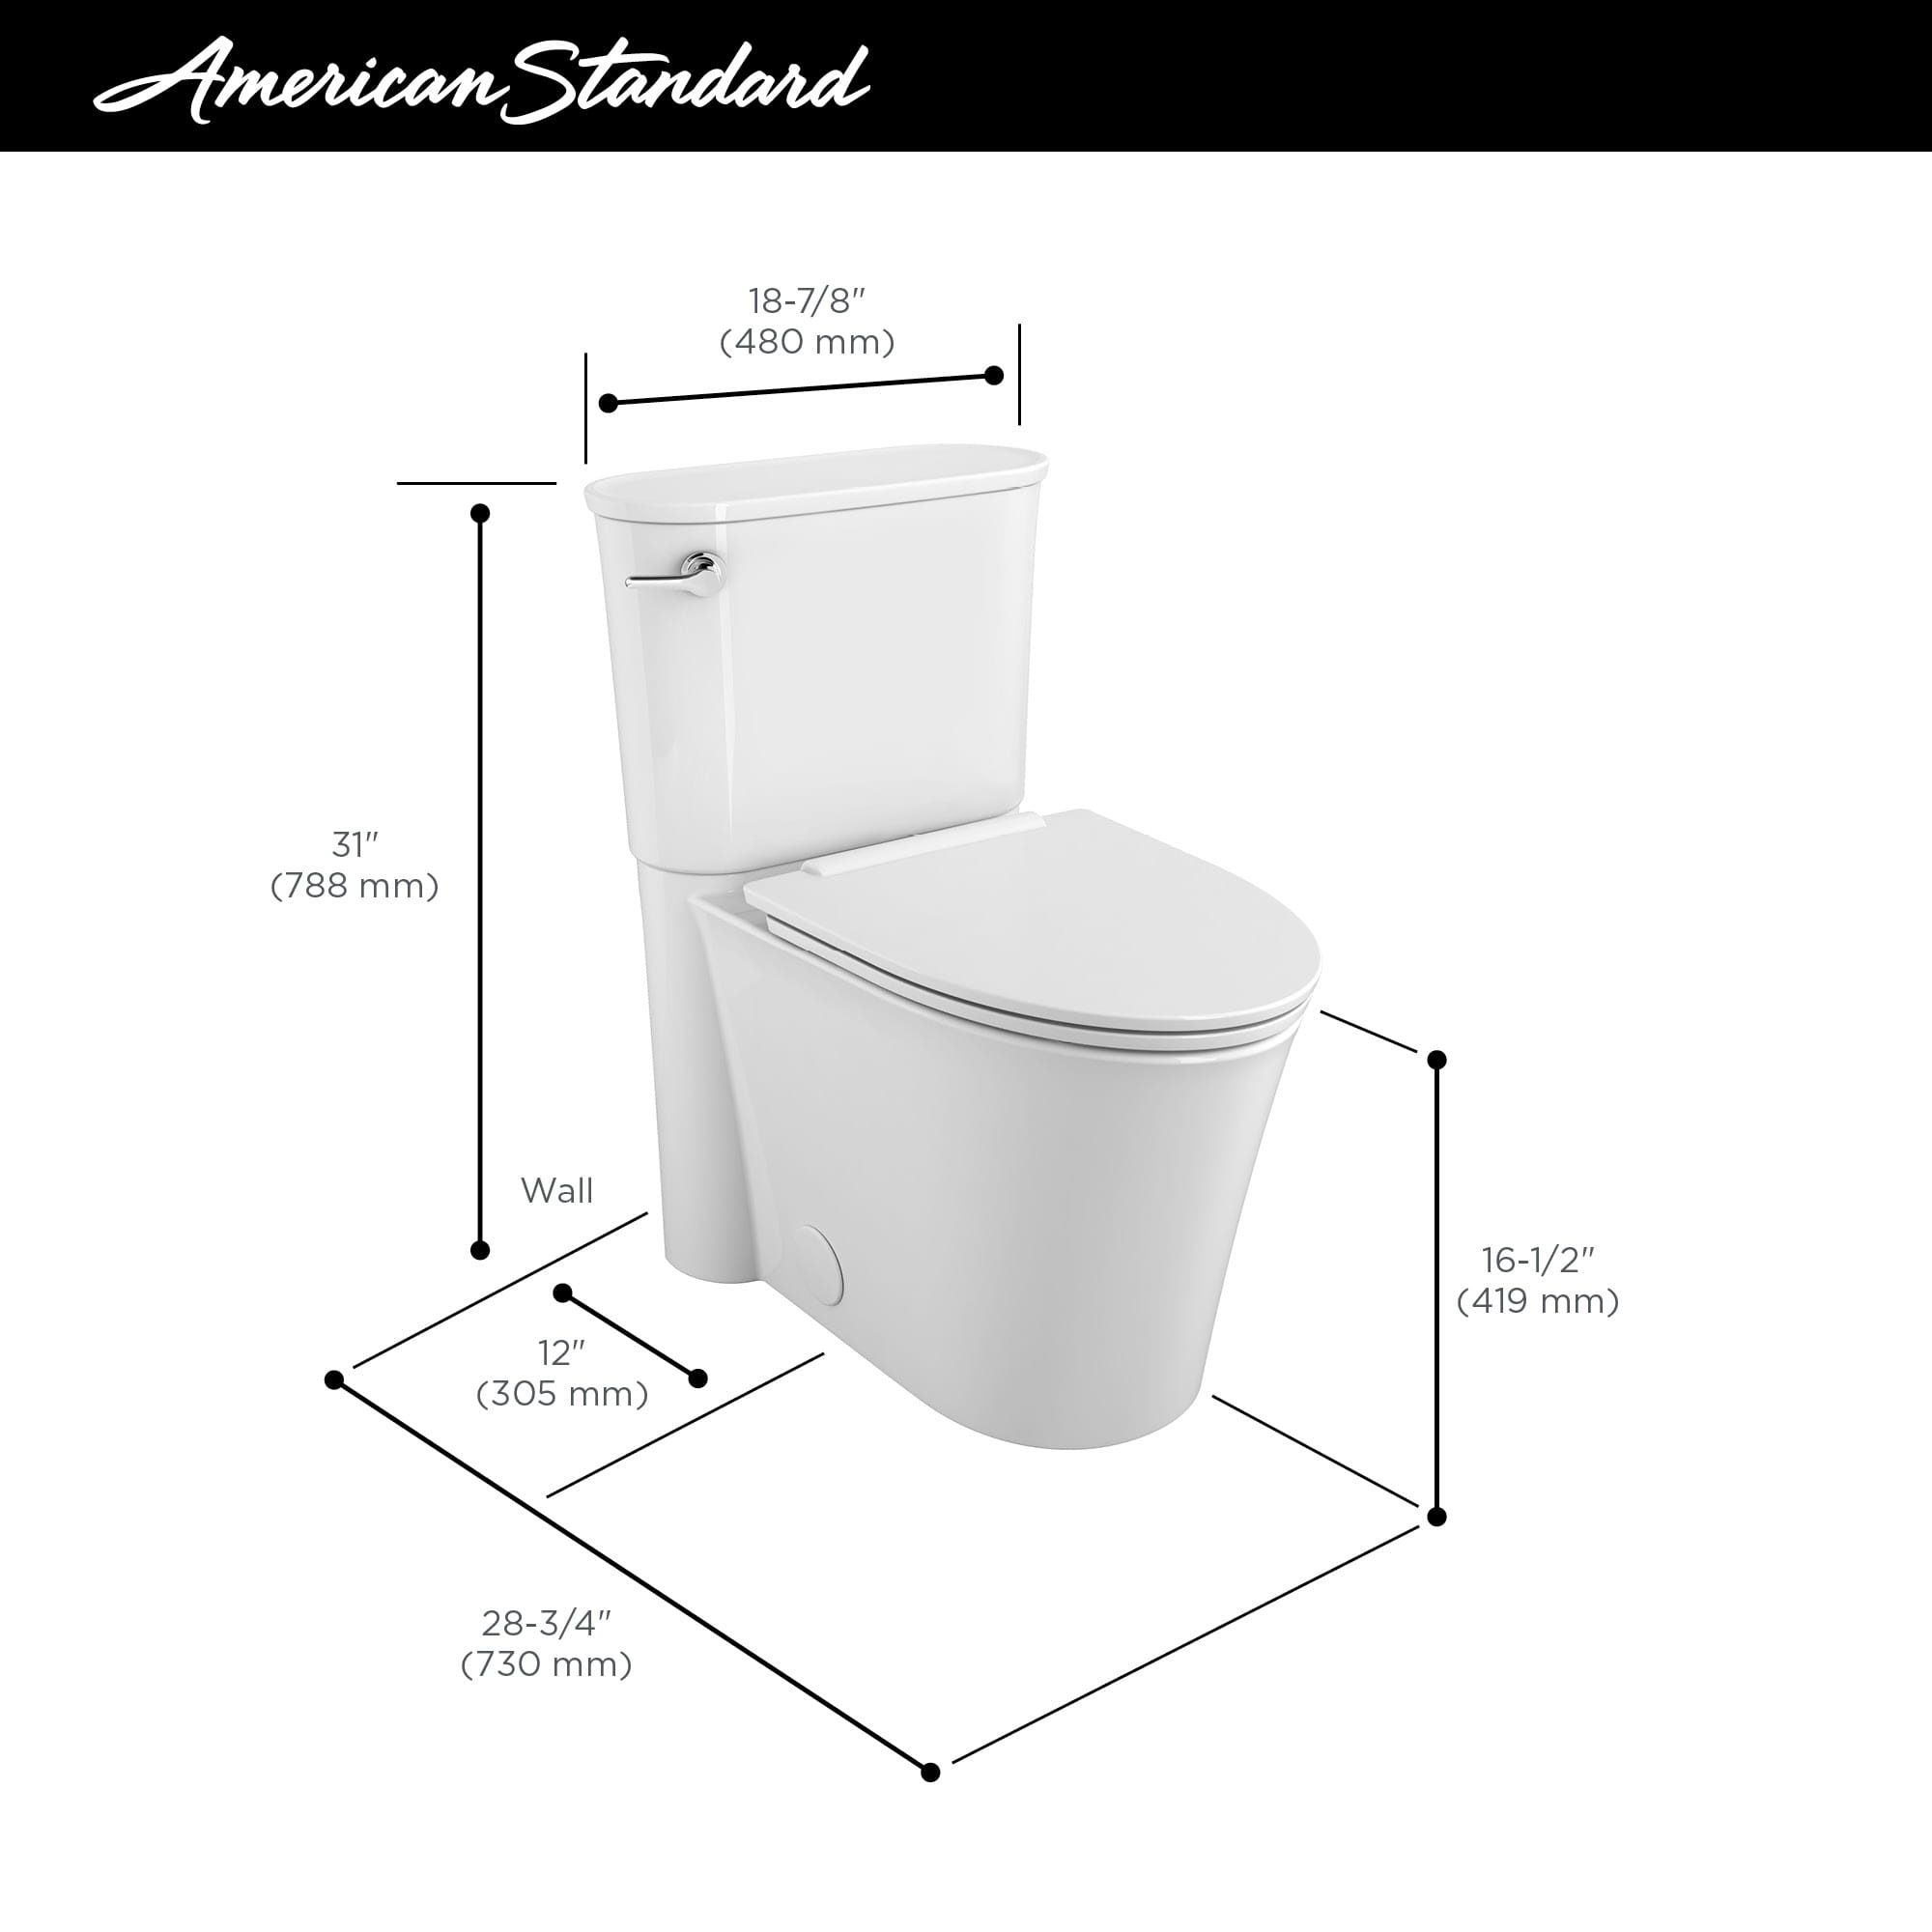 Studio® S Skirted Two-Piece 1.28 gpf/4.8 Lpf Chair Height Elongated Toilet With Seat